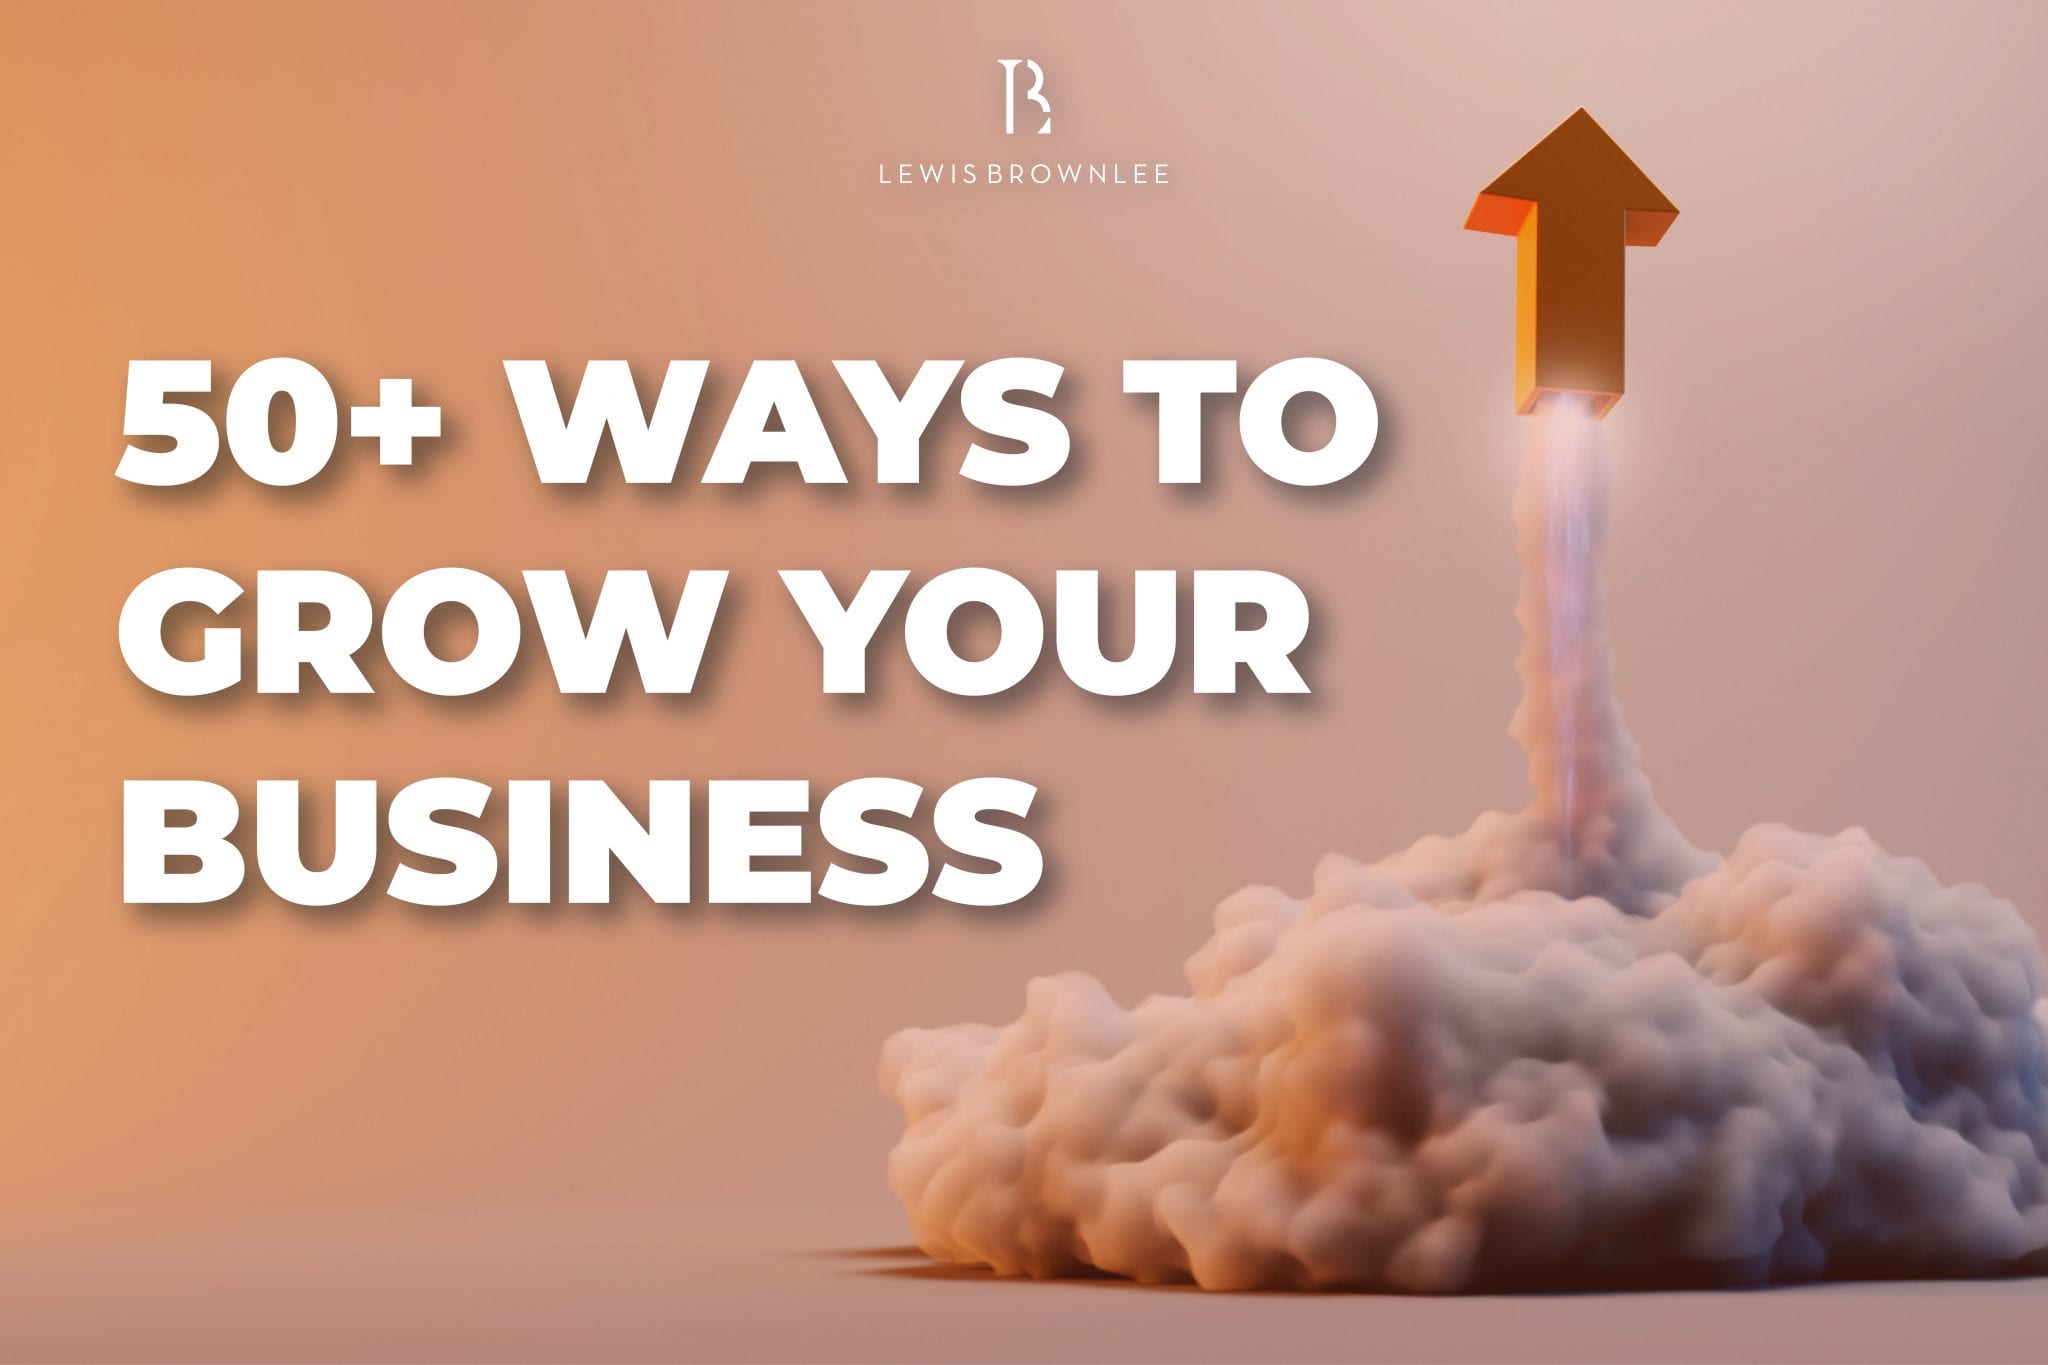 50+ Ways to grow your business